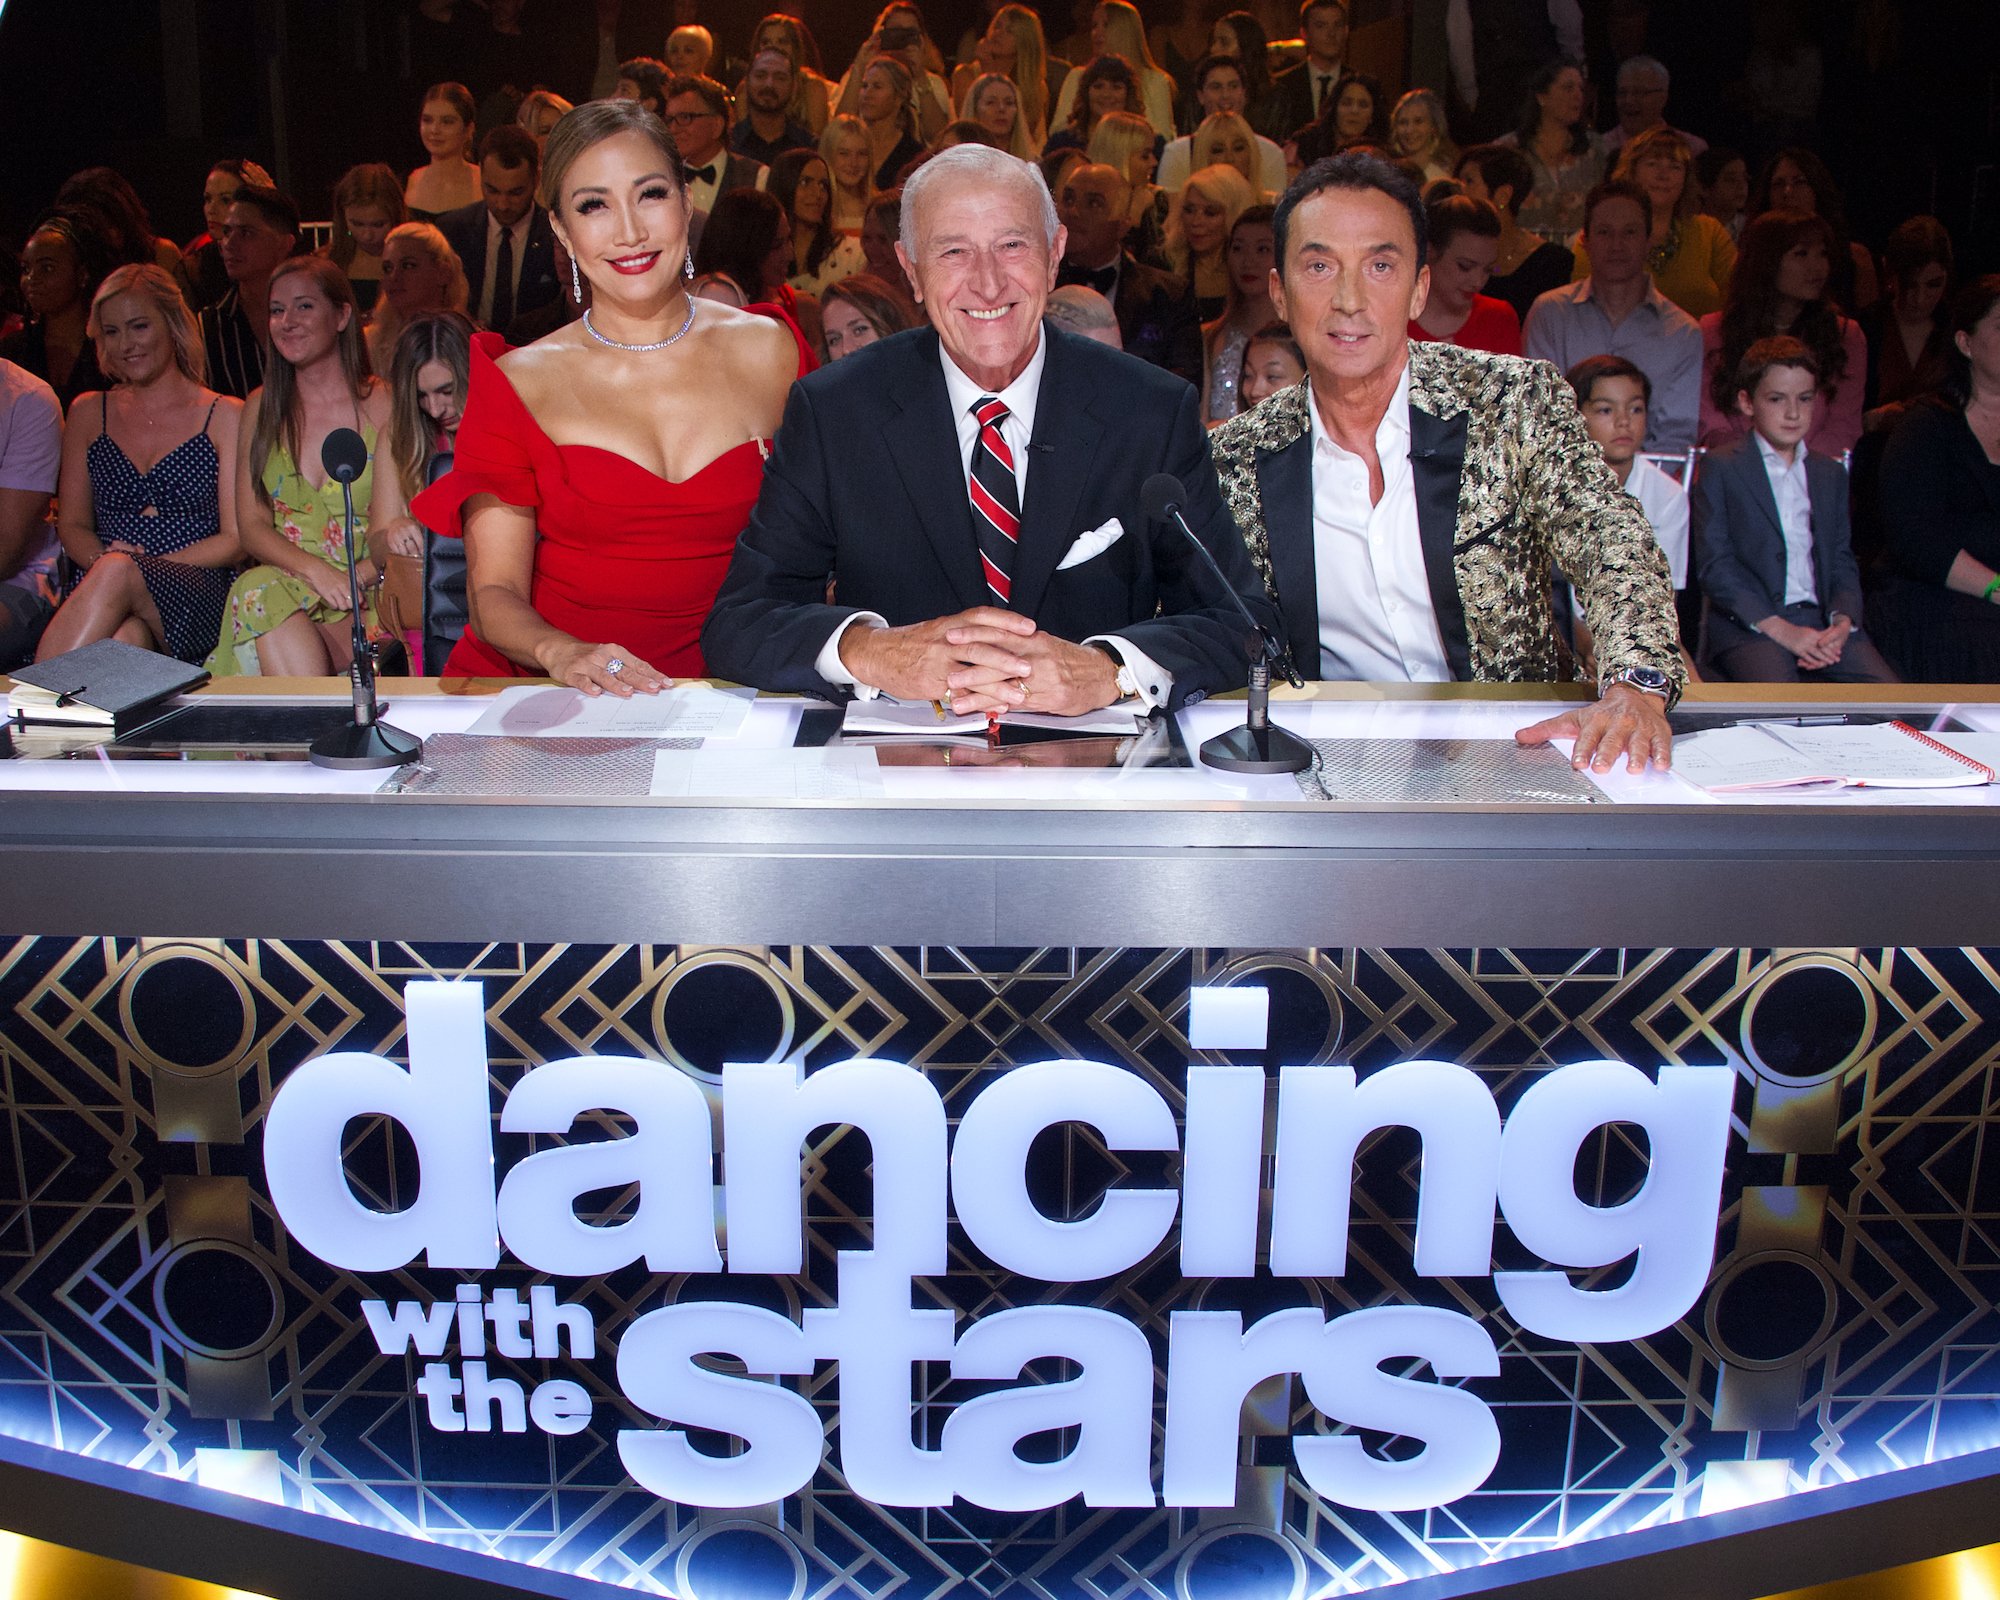 CARRIE ANN INABA, LEN GOODMAN, and BRUNO TONIOLI on the judges panel of 'Dancing With the Stars'